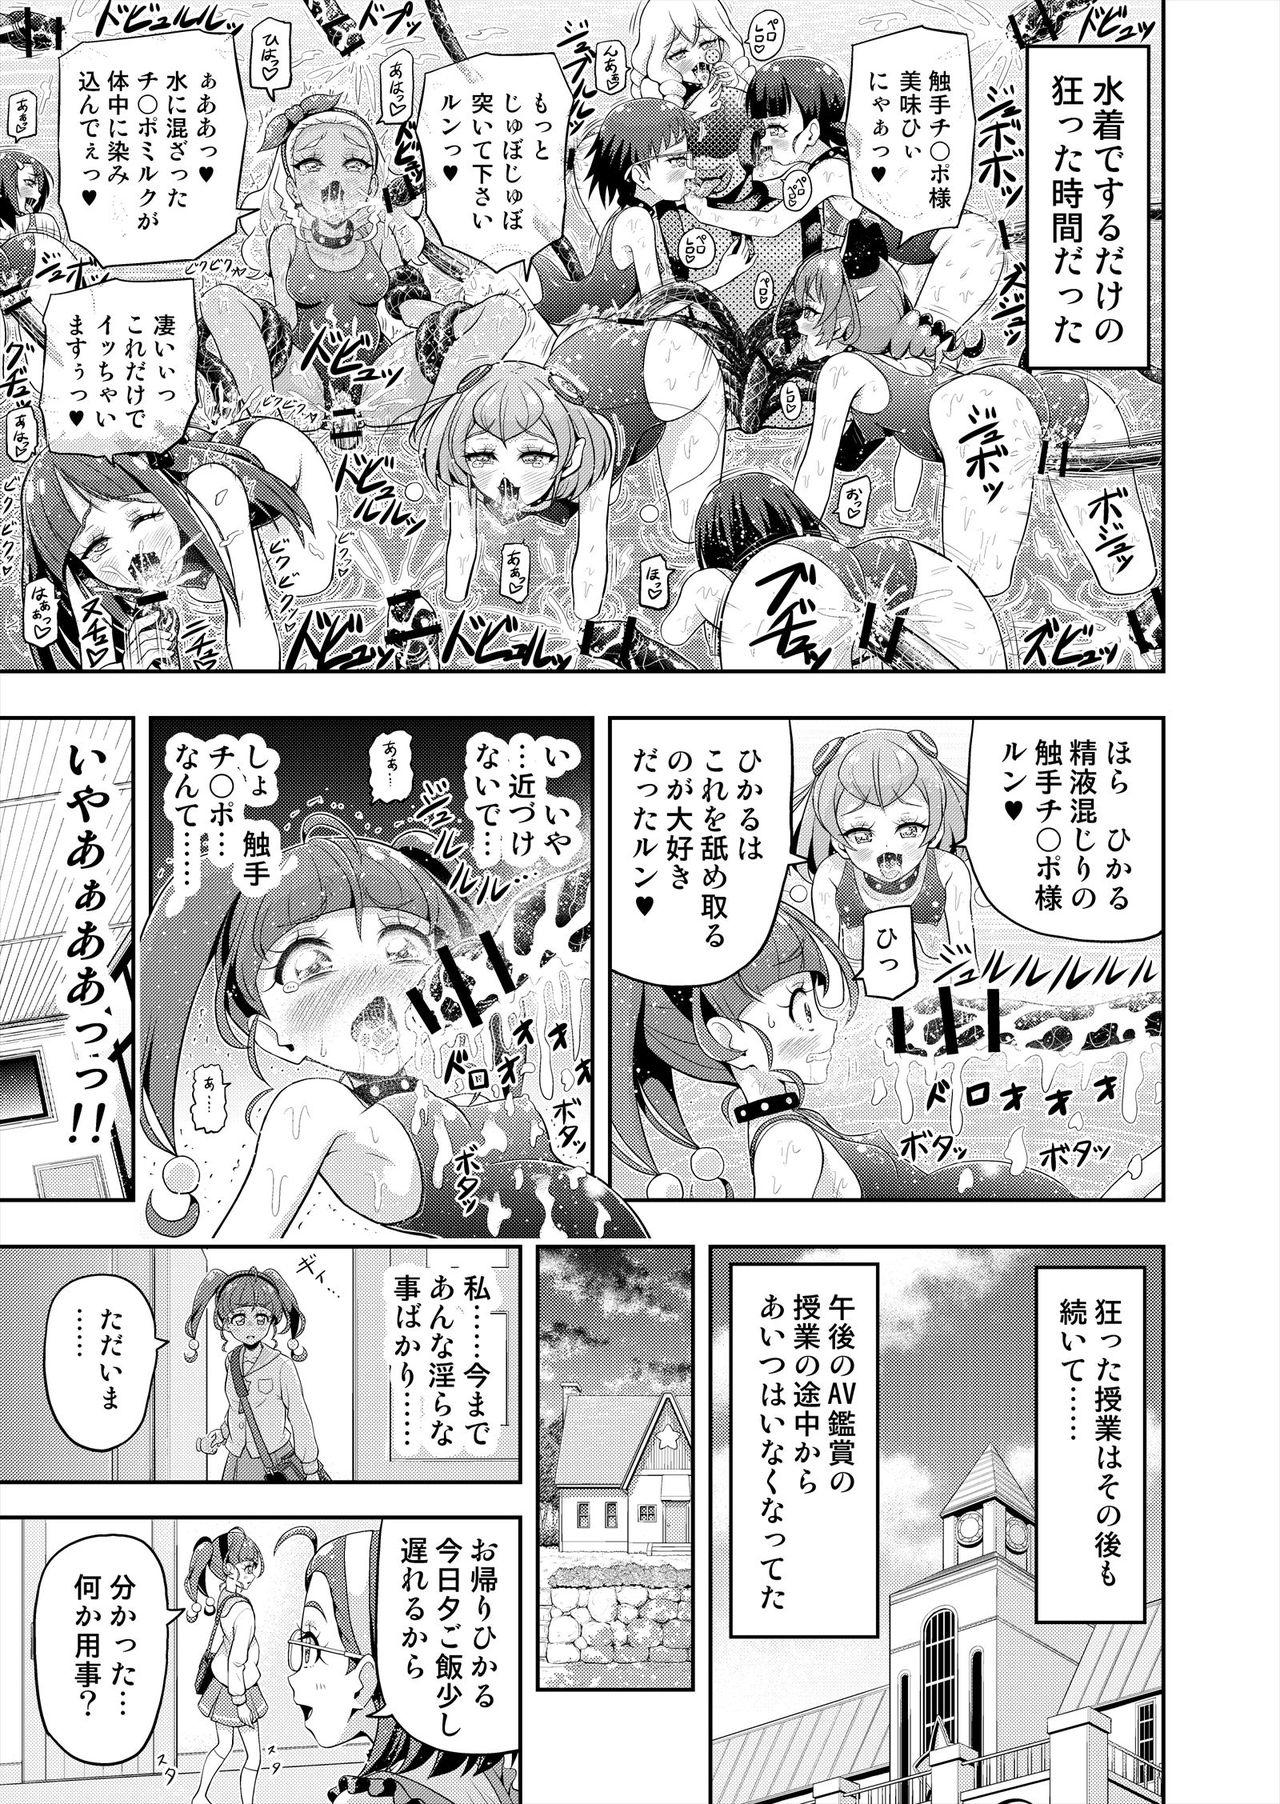 Chat Hoshi Asobi 2 - Star twinkle precure Gay - Page 12